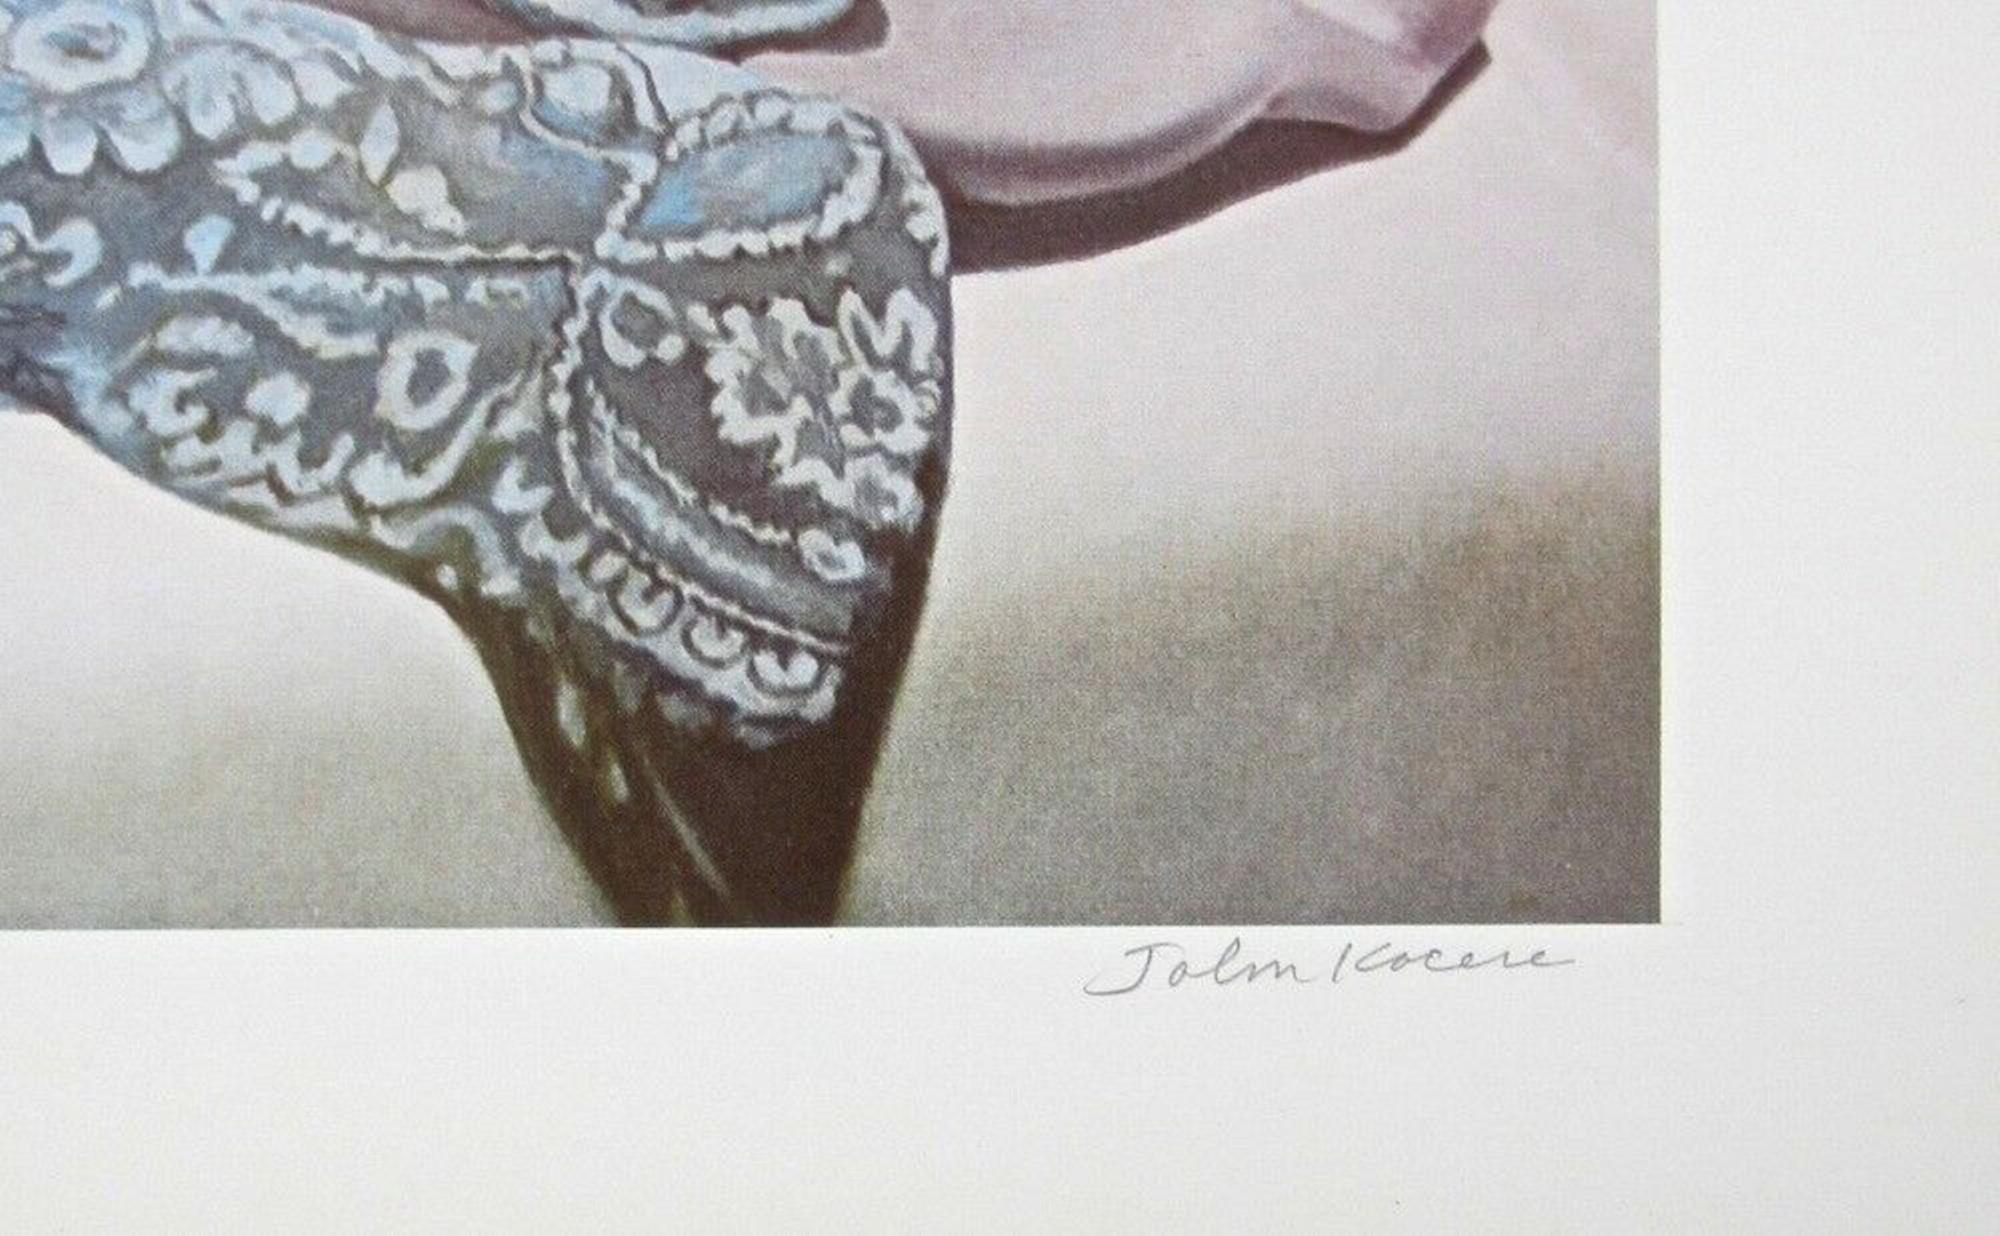 Artist: John Kacere (1930-1999)
Title: Diane
Year: 1977
Edition: 200, plus proofs.
Medium: Lithograph on Somerset paper
Size: 19 x 28 inches
Condition: Excellent
Inscription: Signed by the artist.

JOHN KACERE (1920-1999) Is considered a